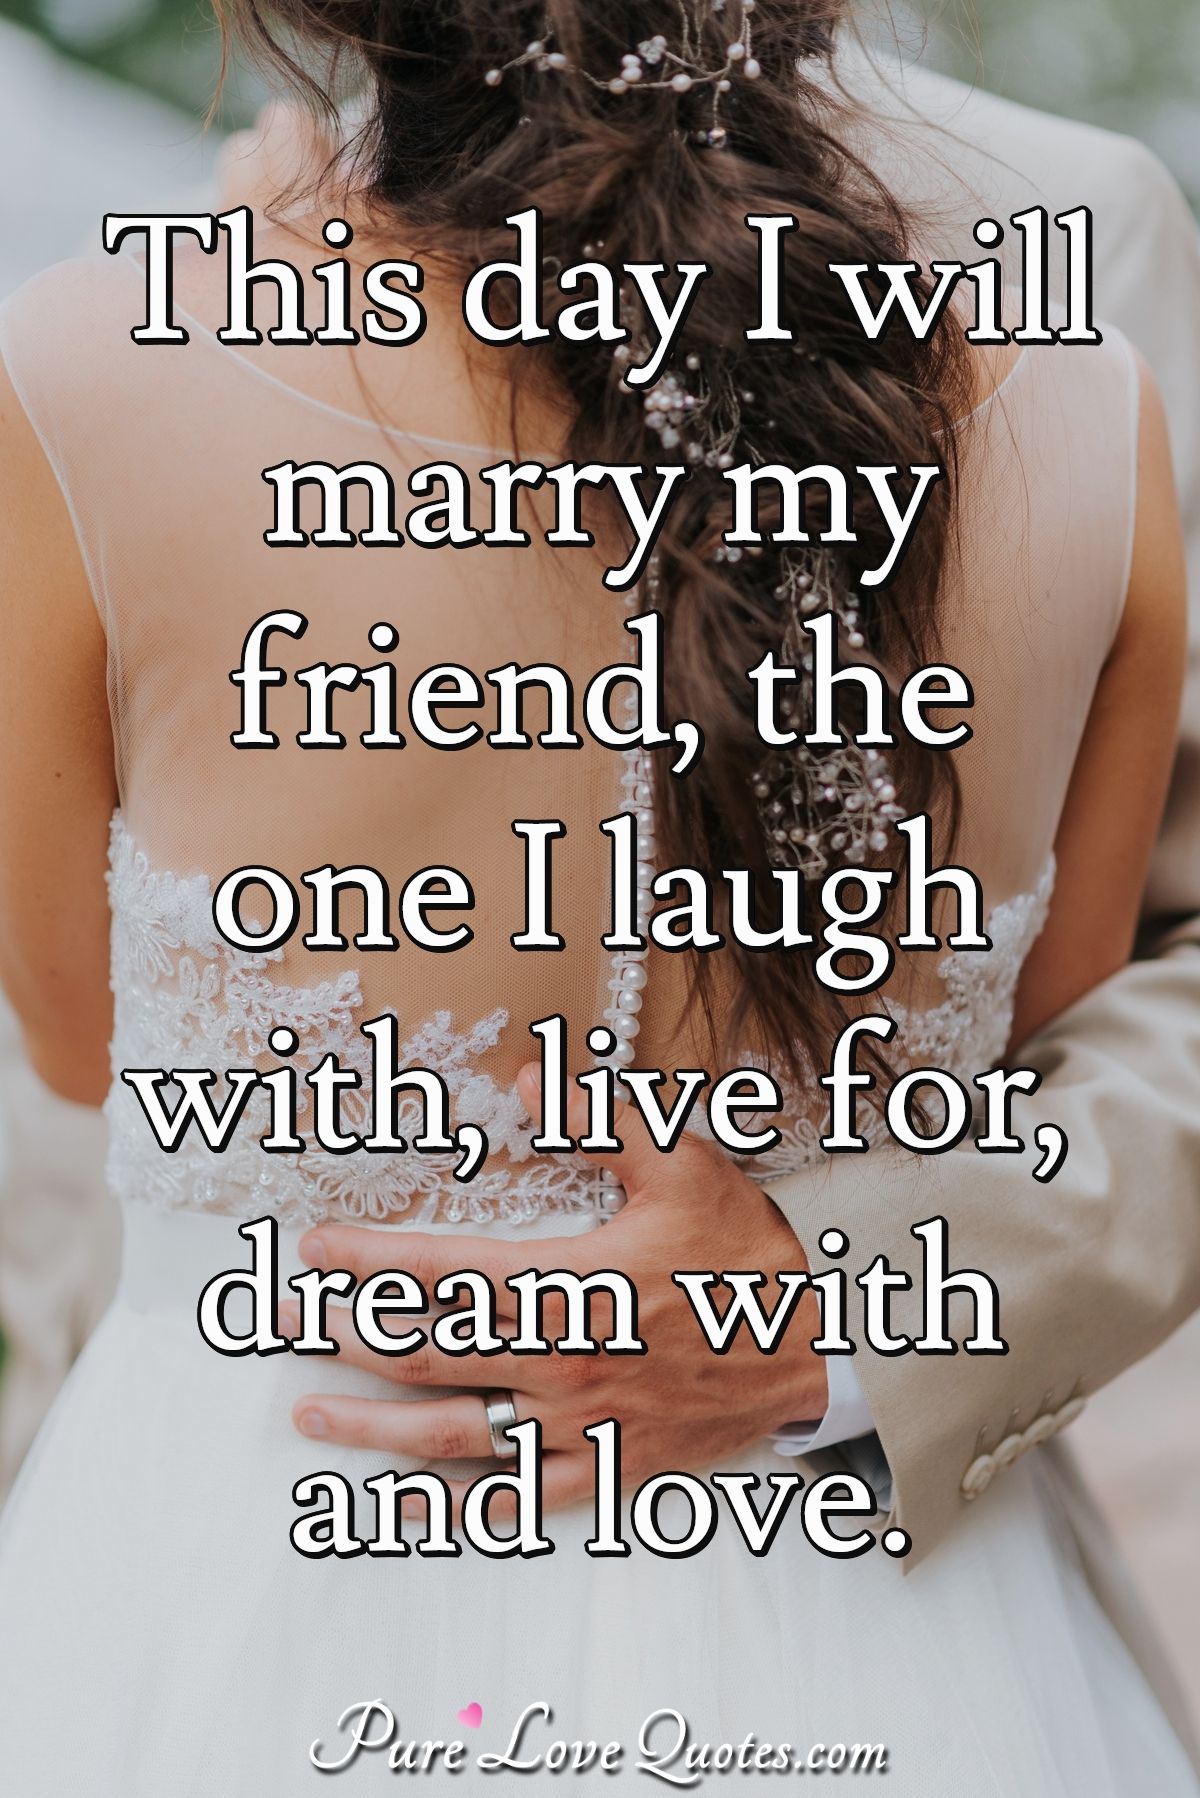 This day I will marry my friend, the one I laugh with, live for, dream